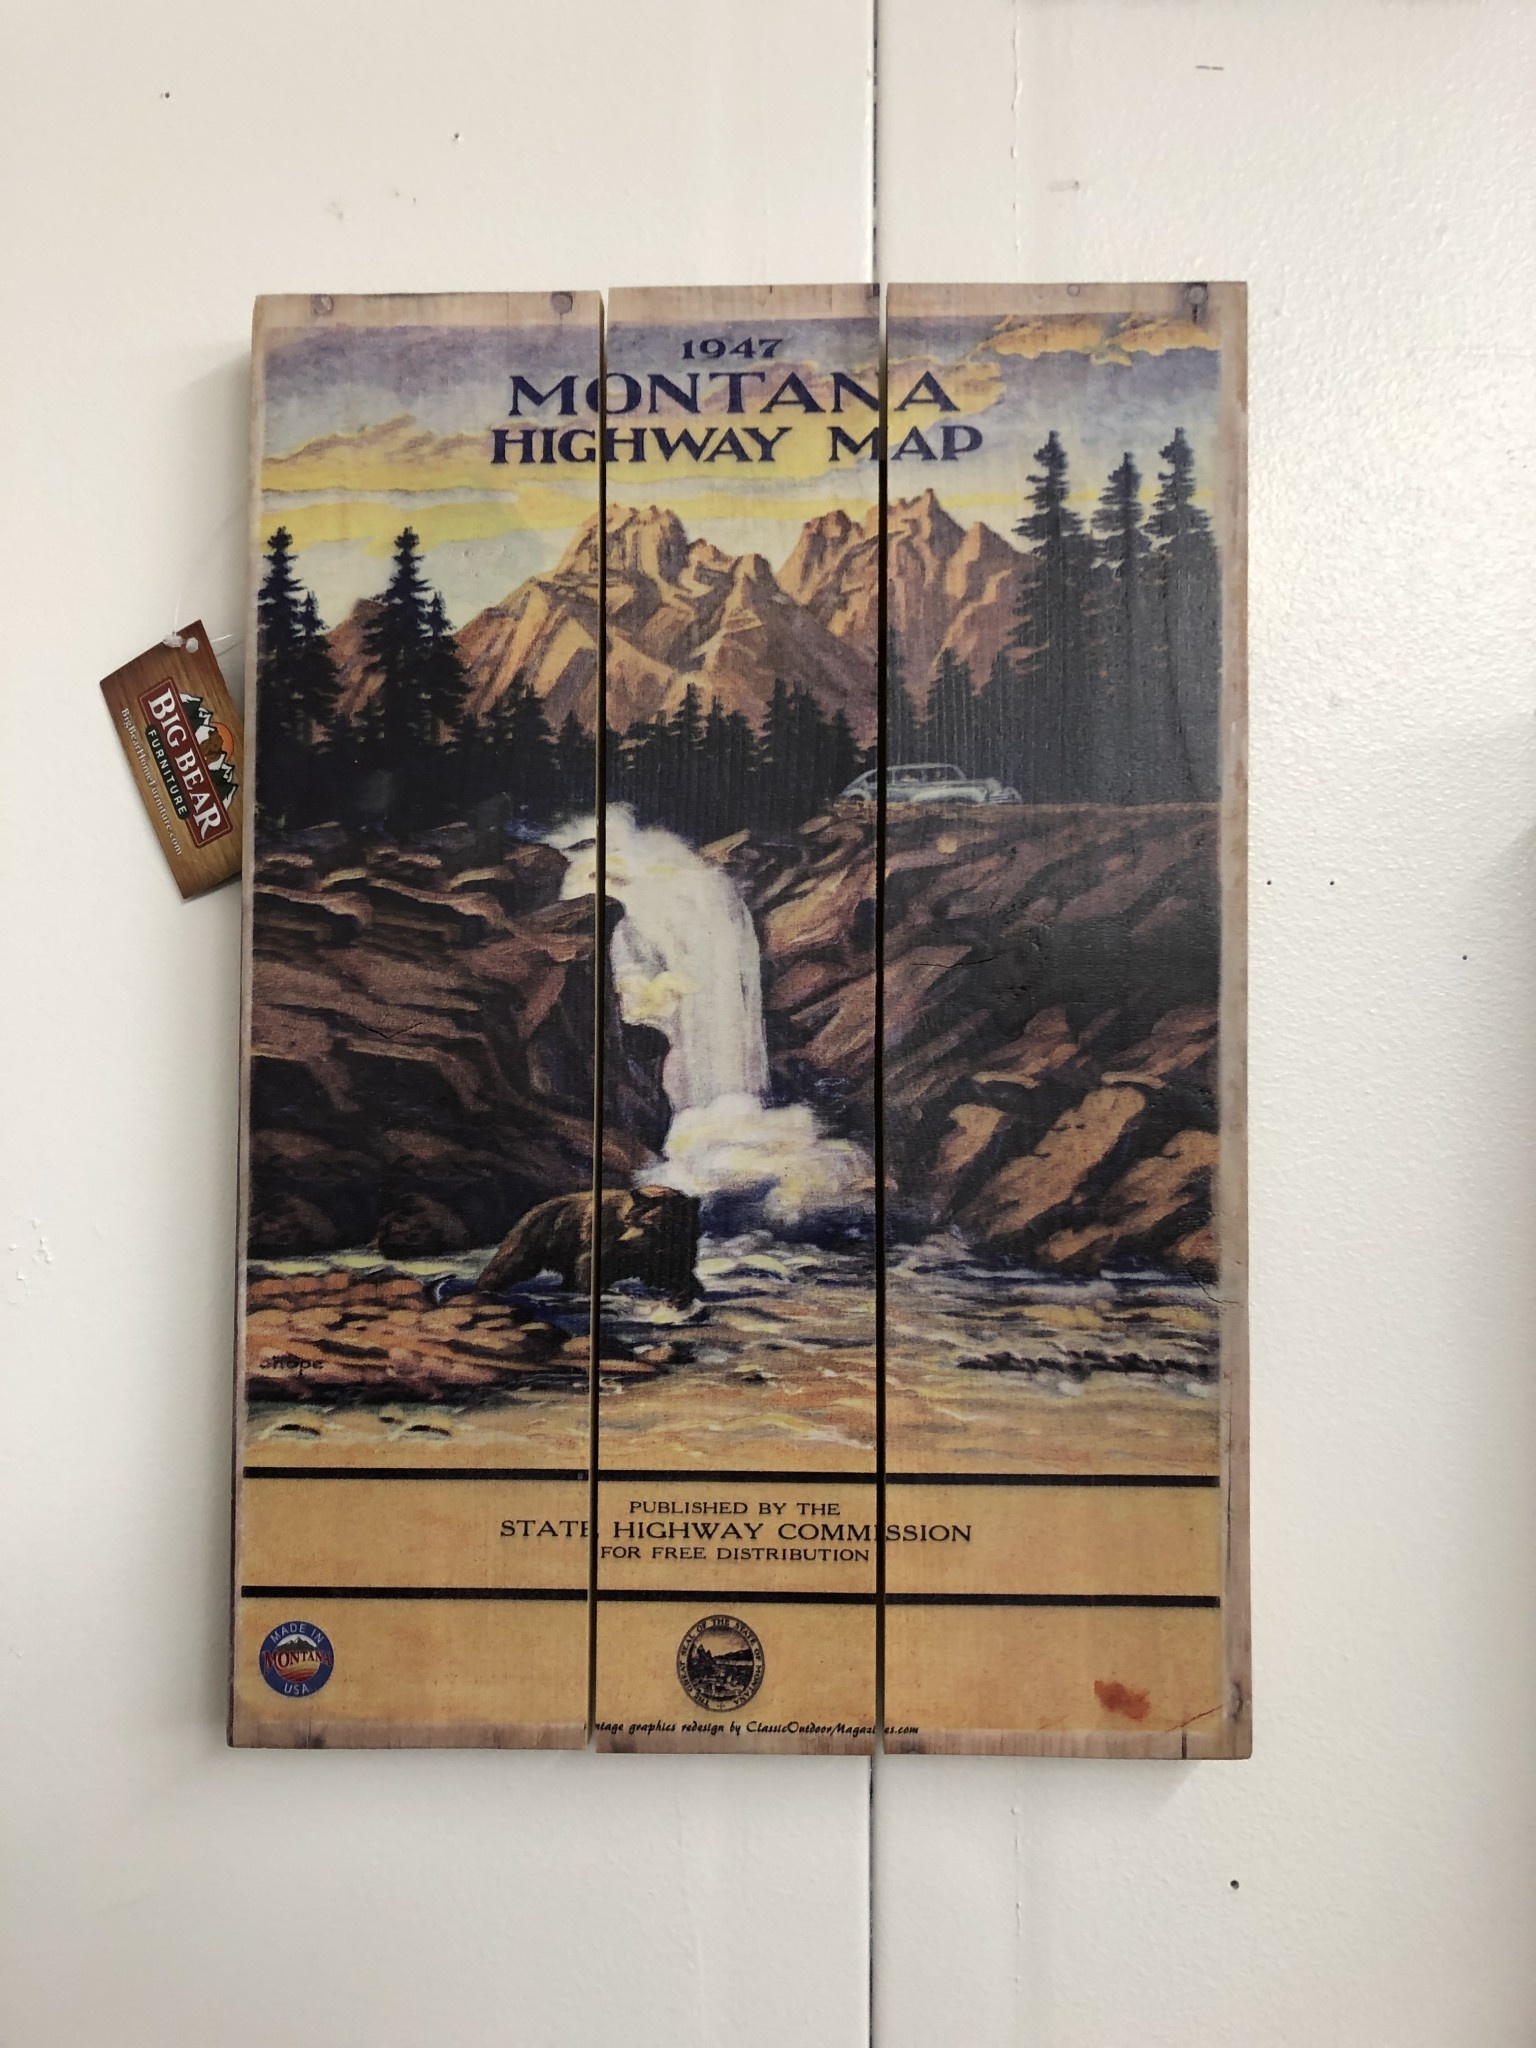 Classic Outdoor Magazines #9 1947 Montana Map 14x20 Wood Sign